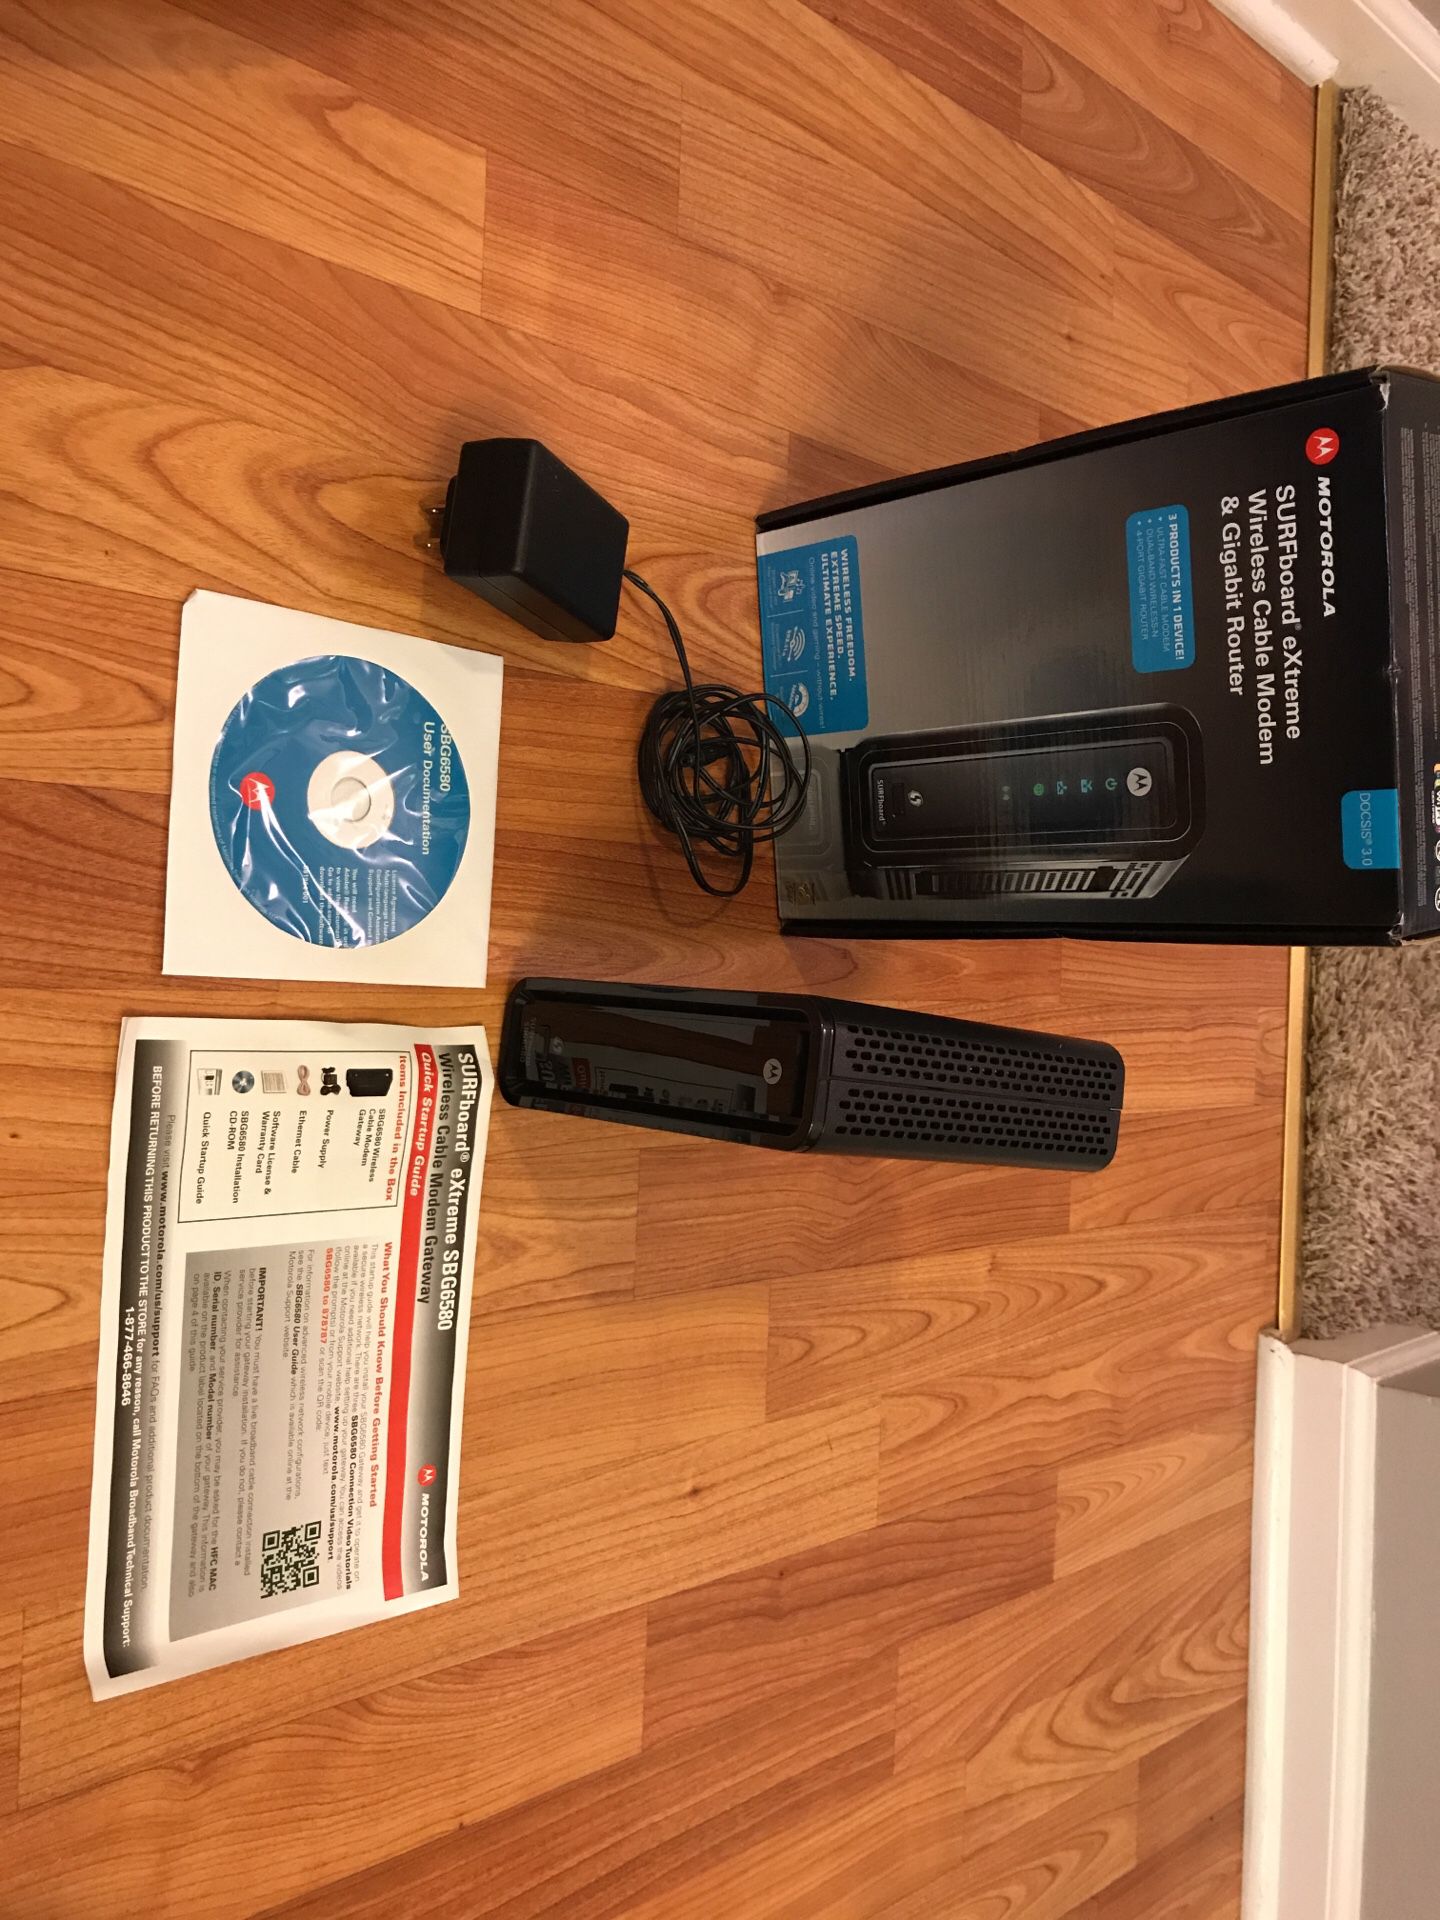 Motorola surfboard SBG6580 modem and router in one